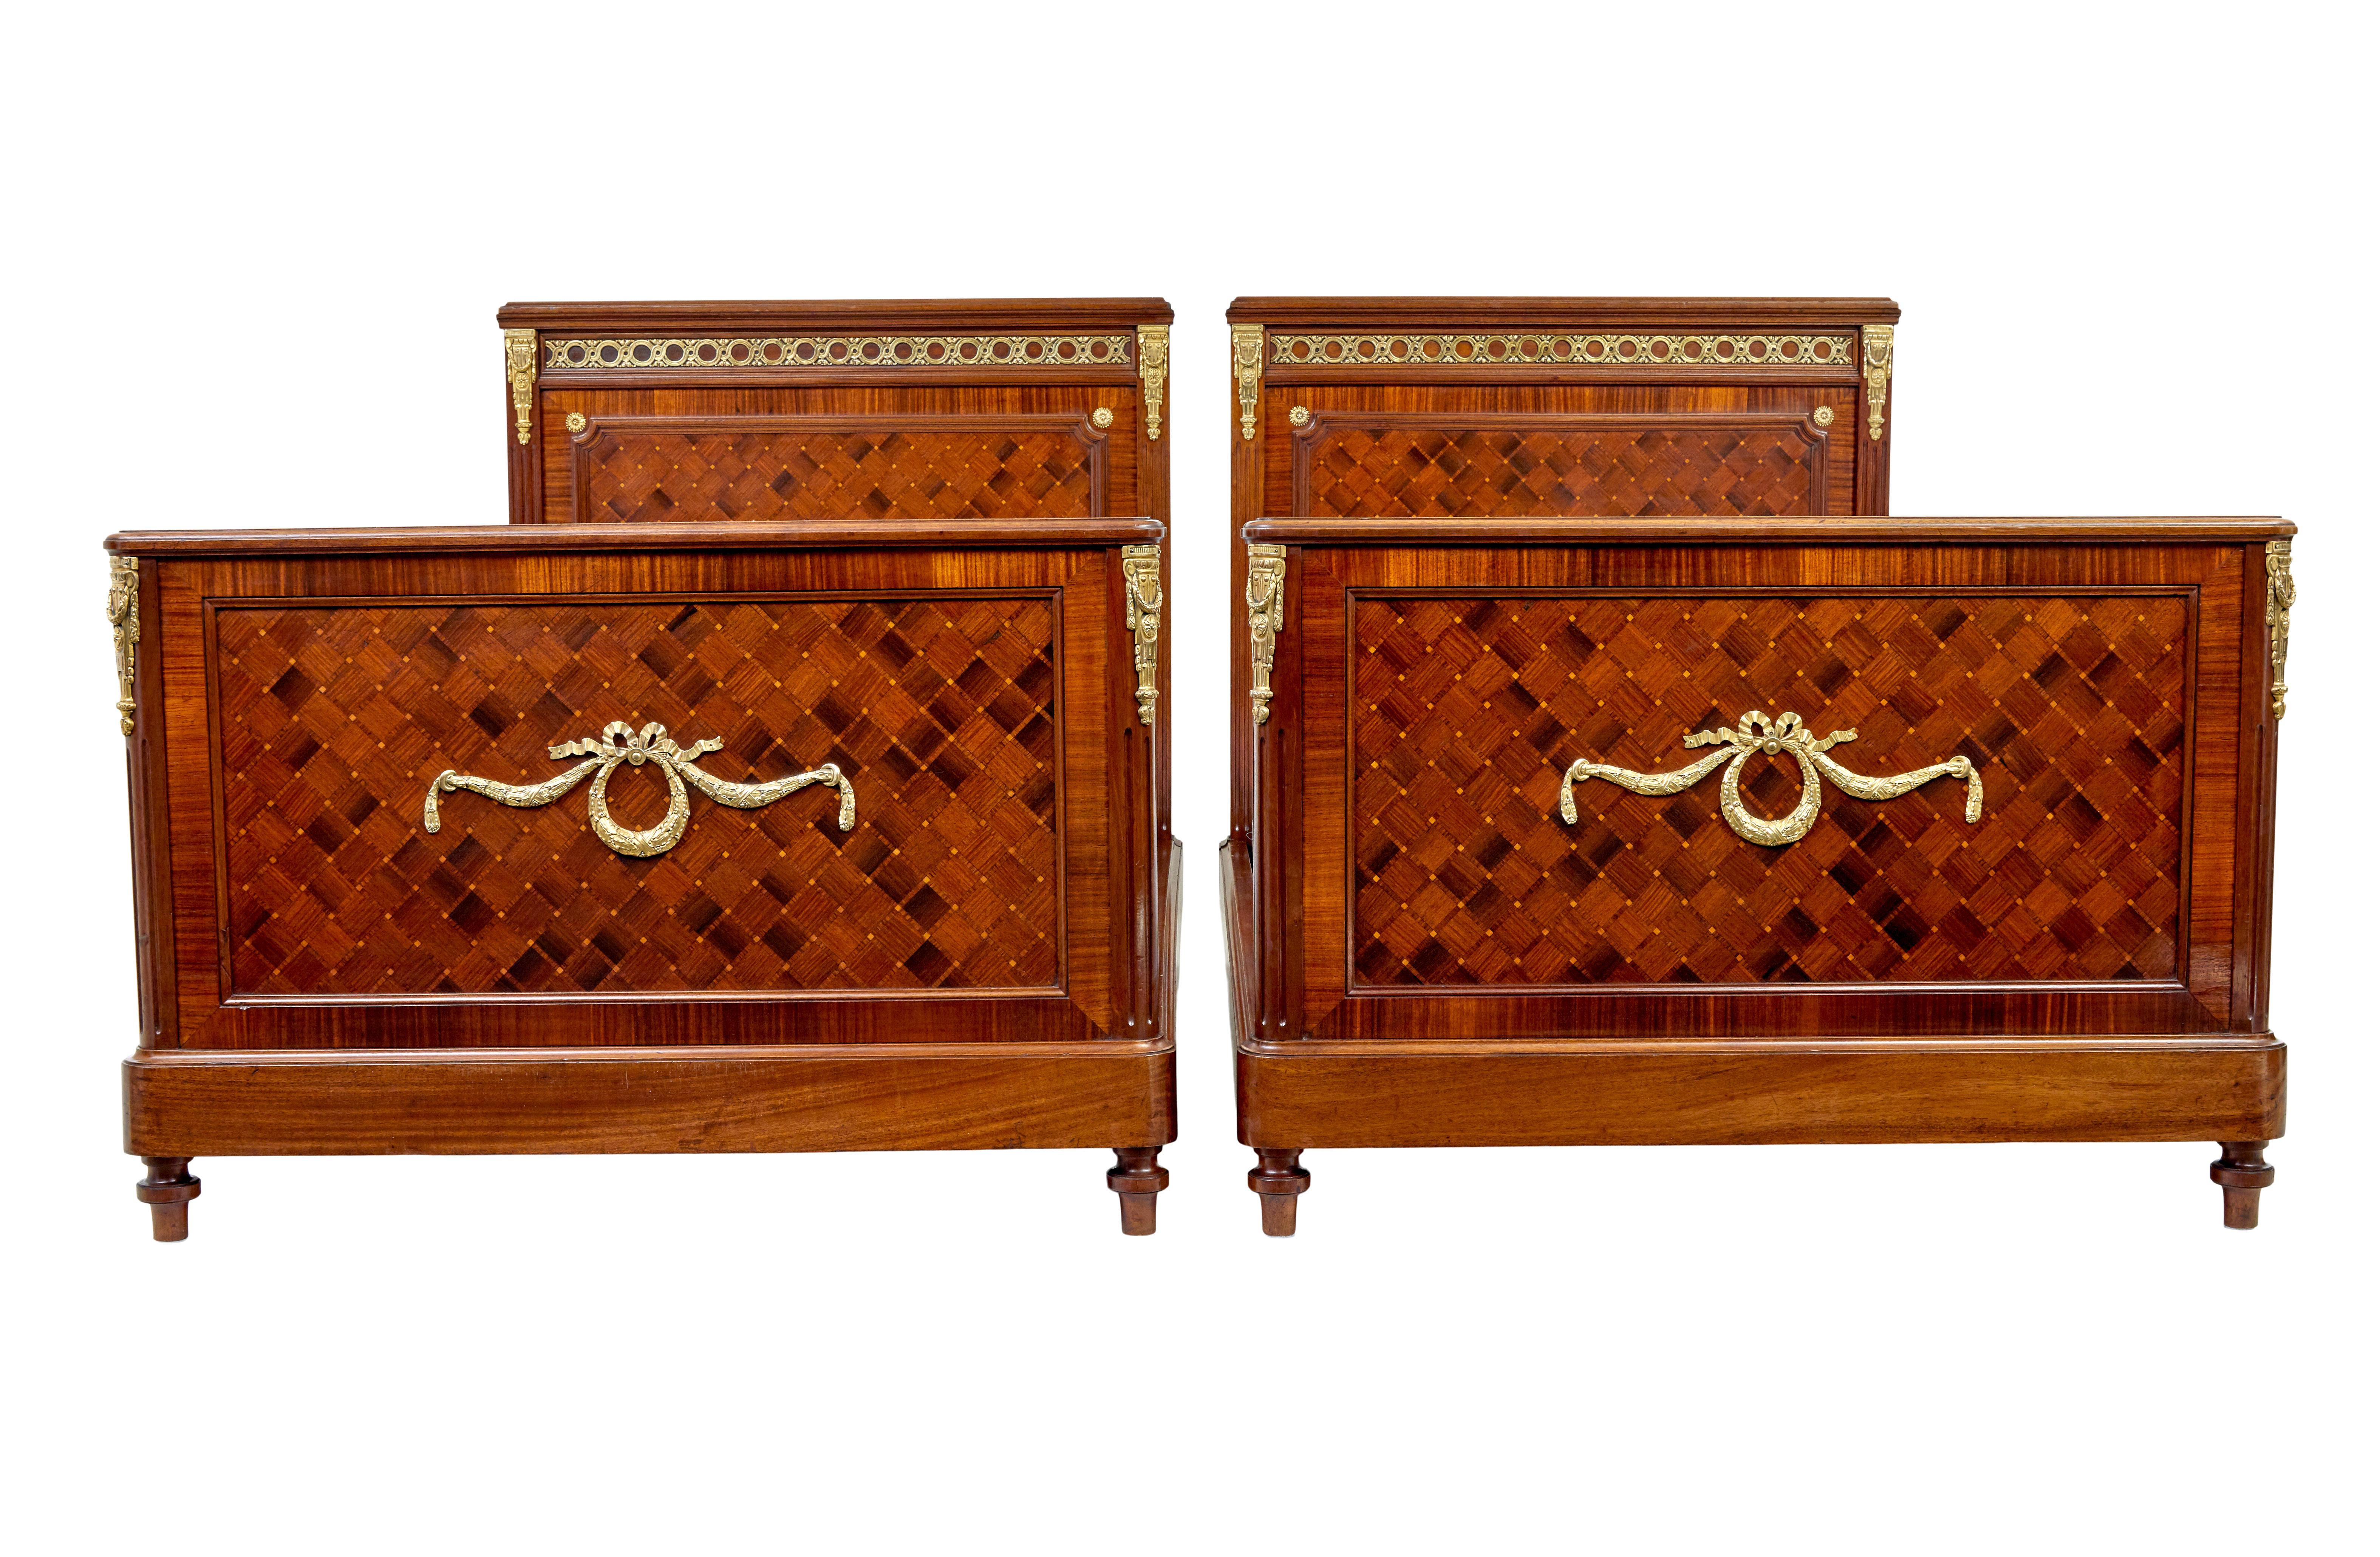 Pair of 19th century french empire mahogany and walnut beds circa 1890.

Fine quality pair of large single beds of the empire revival period.  Beautifully made from walnut and mahogany and further decorated with ormolu mounts.

Headboard and foot